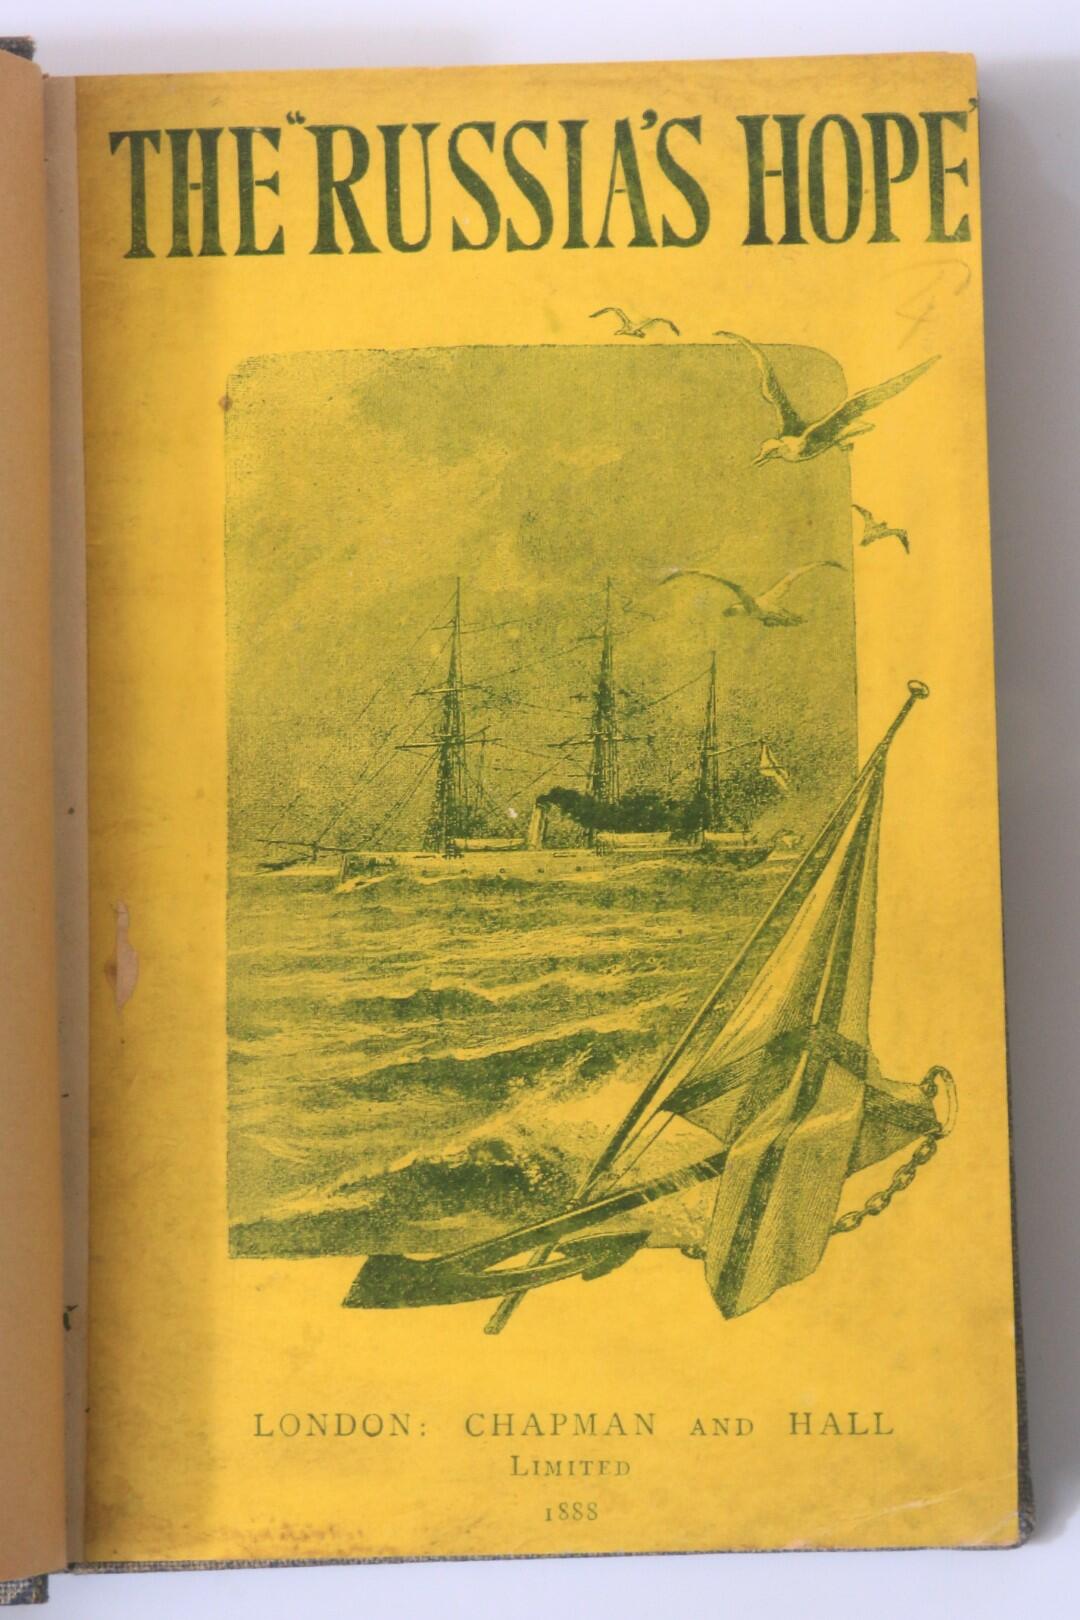 Anonymous [Alexsandr Konkevic] [trans. Charles James Cooke] - The Russia?s Hope: Or Britannia No Longer Rules the Waves; Showing How the Muscovite Bear Got at the British Whale - Chapman & Hall, 1888, First Edition.